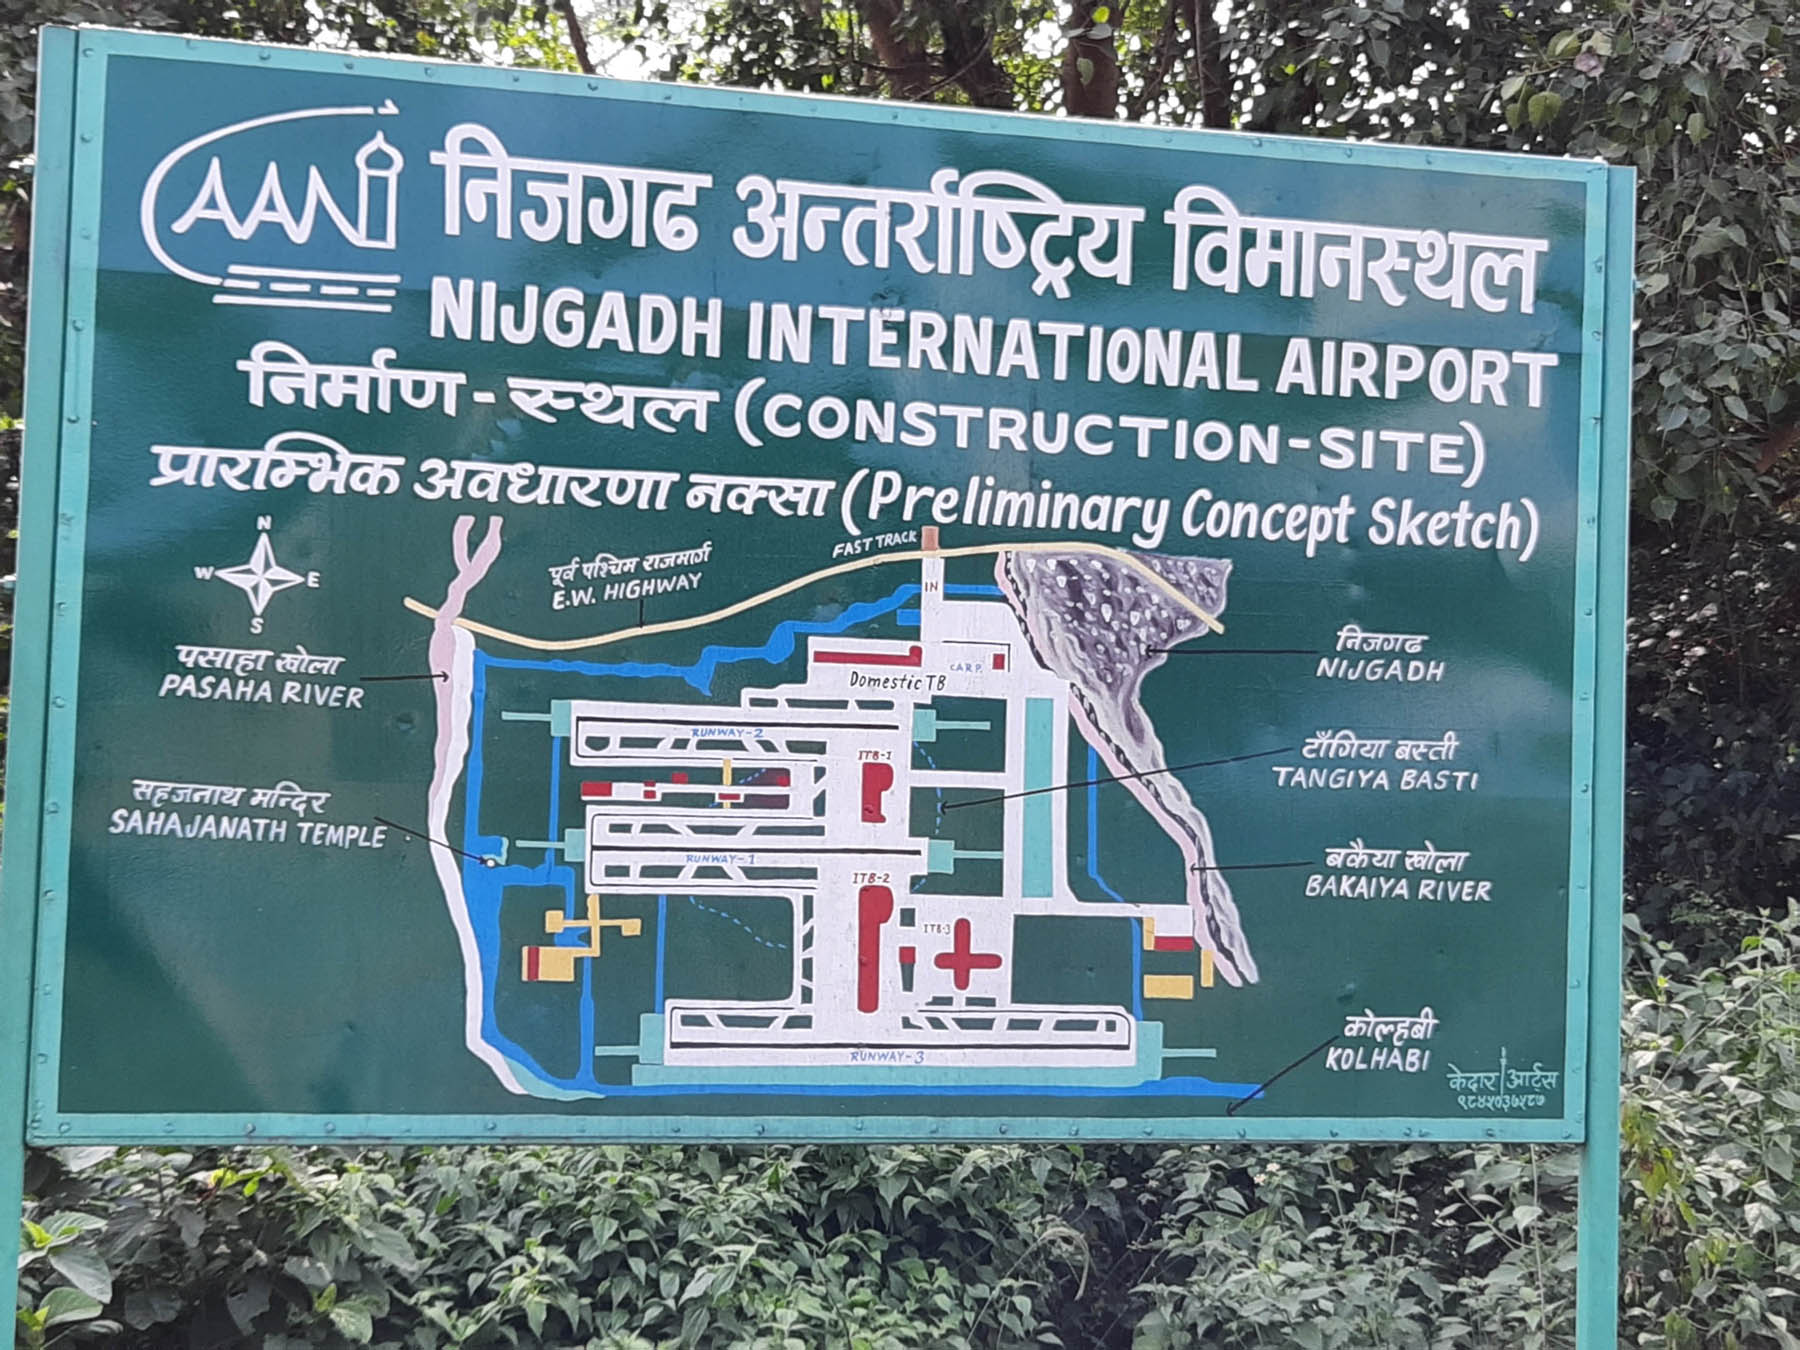 Nijgadh is appropriate for building international airport, says experts’ group